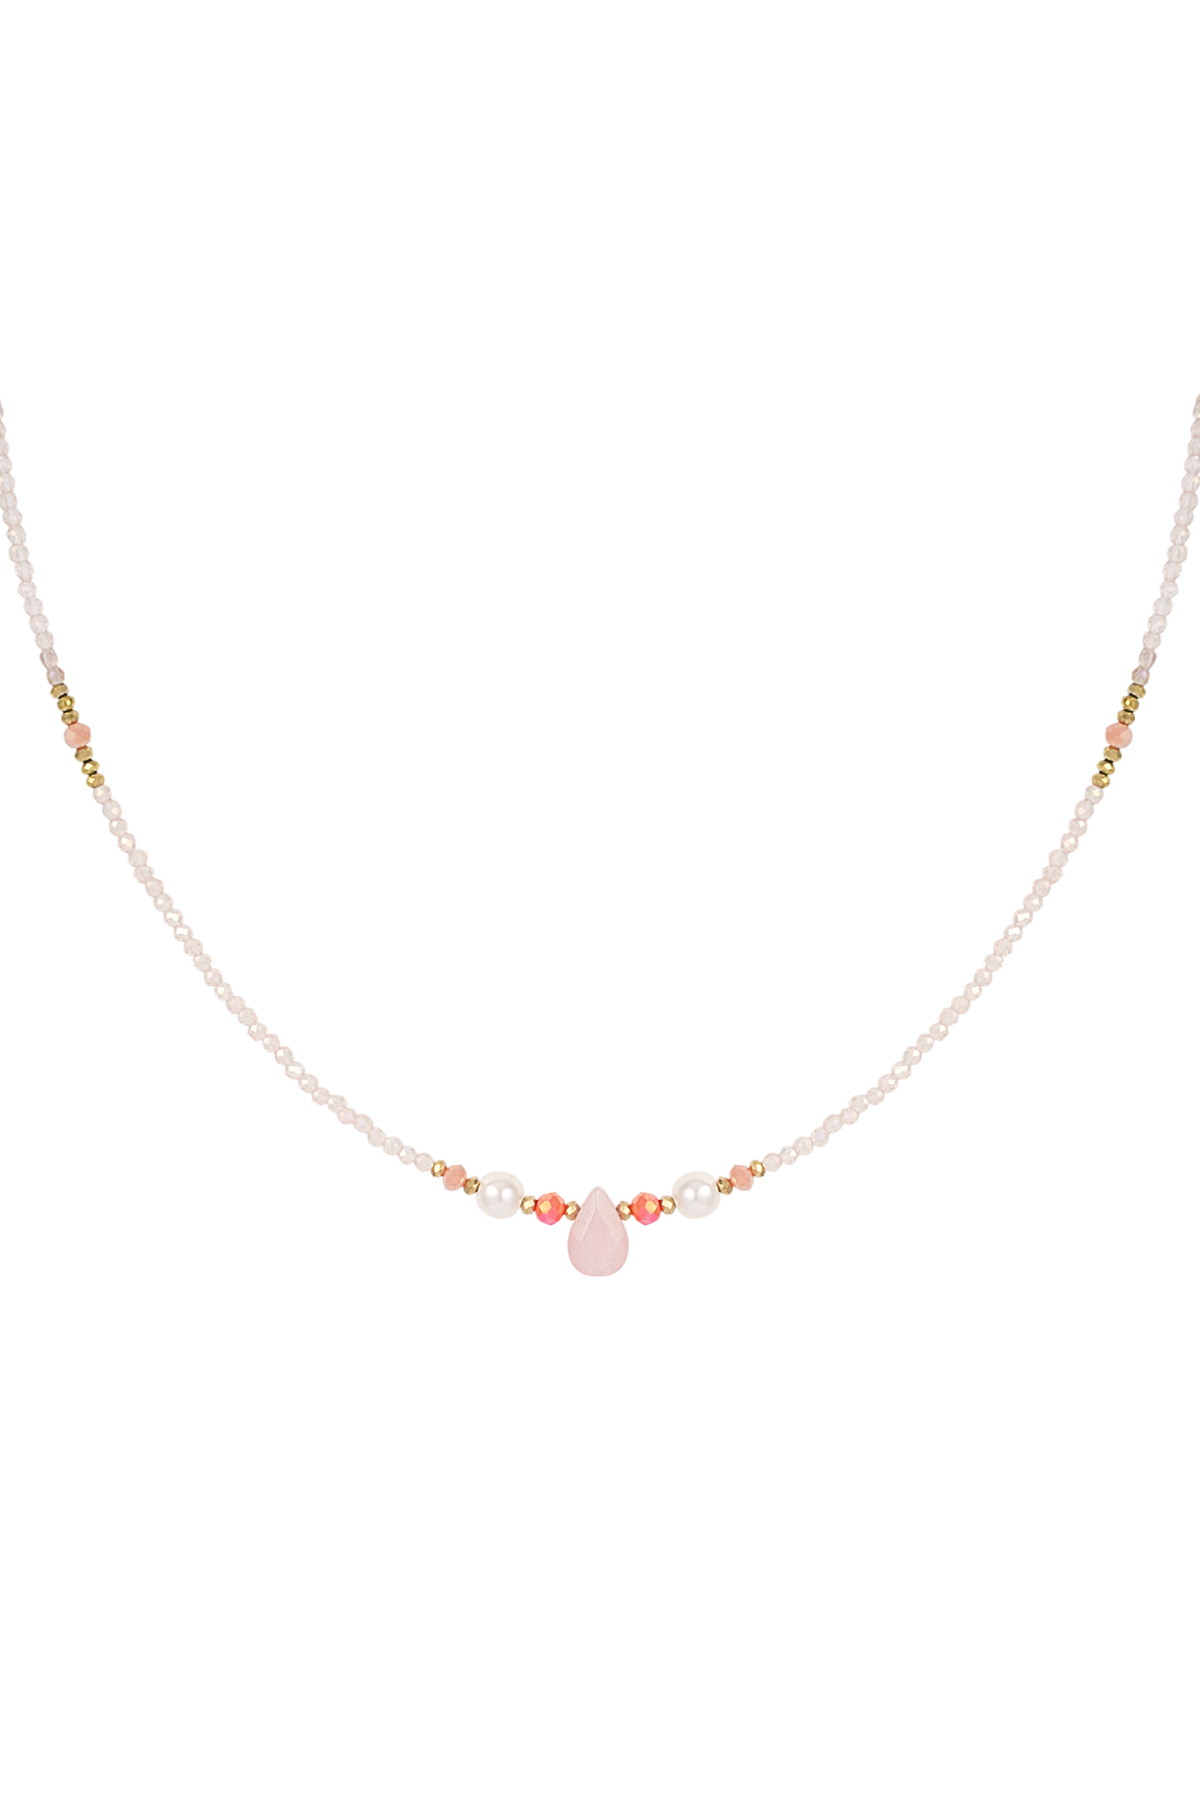 Thin beaded necklace with drop - pink / gold h5 